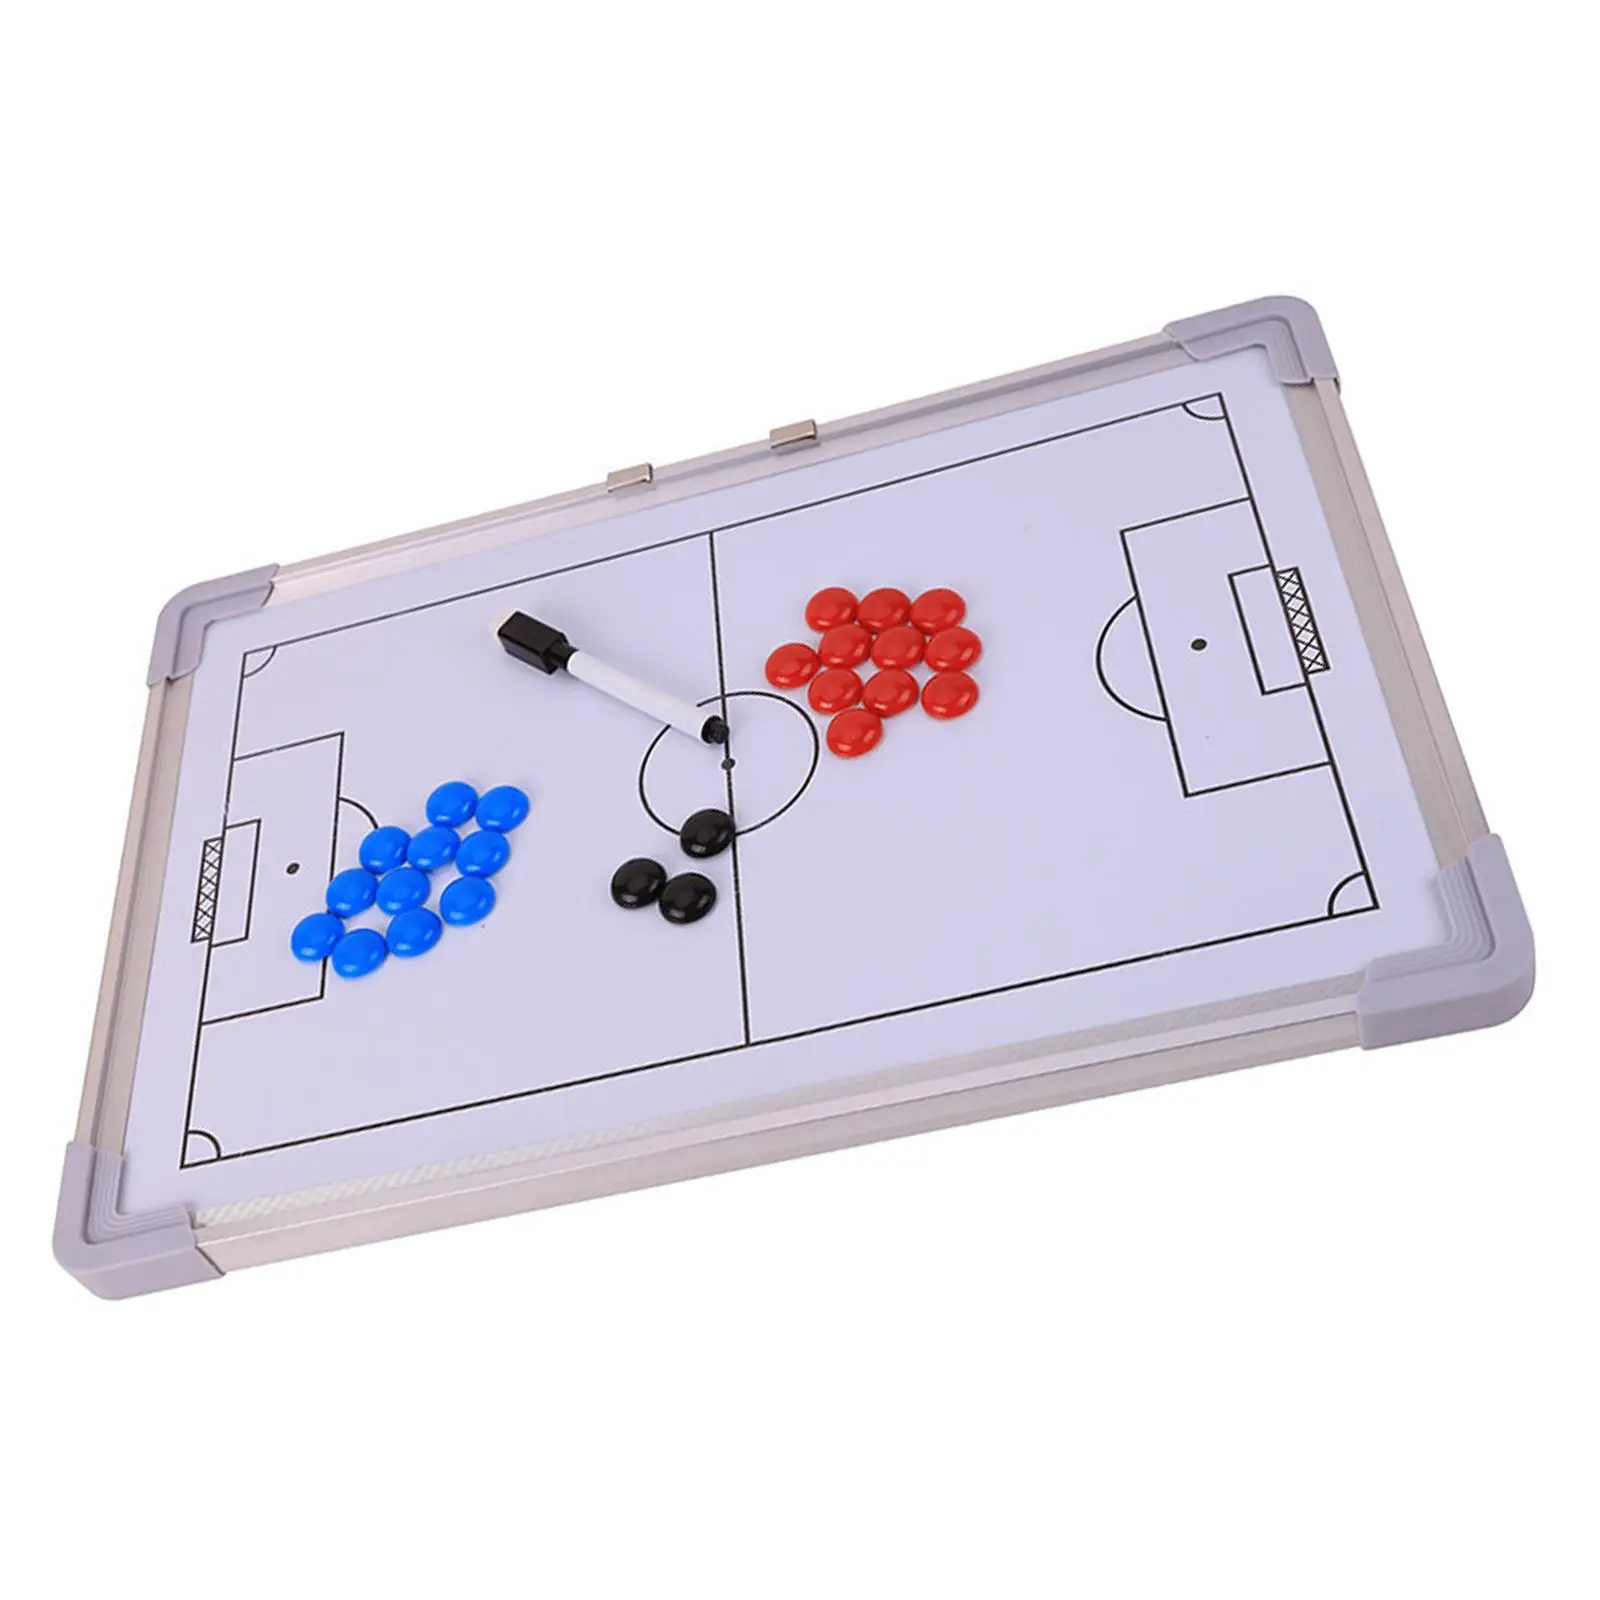 Basketball Football Coaching Board Magnetic Large With 27 Buttons Clear And Delicate Soccer Coaching Training Equipment For Kids